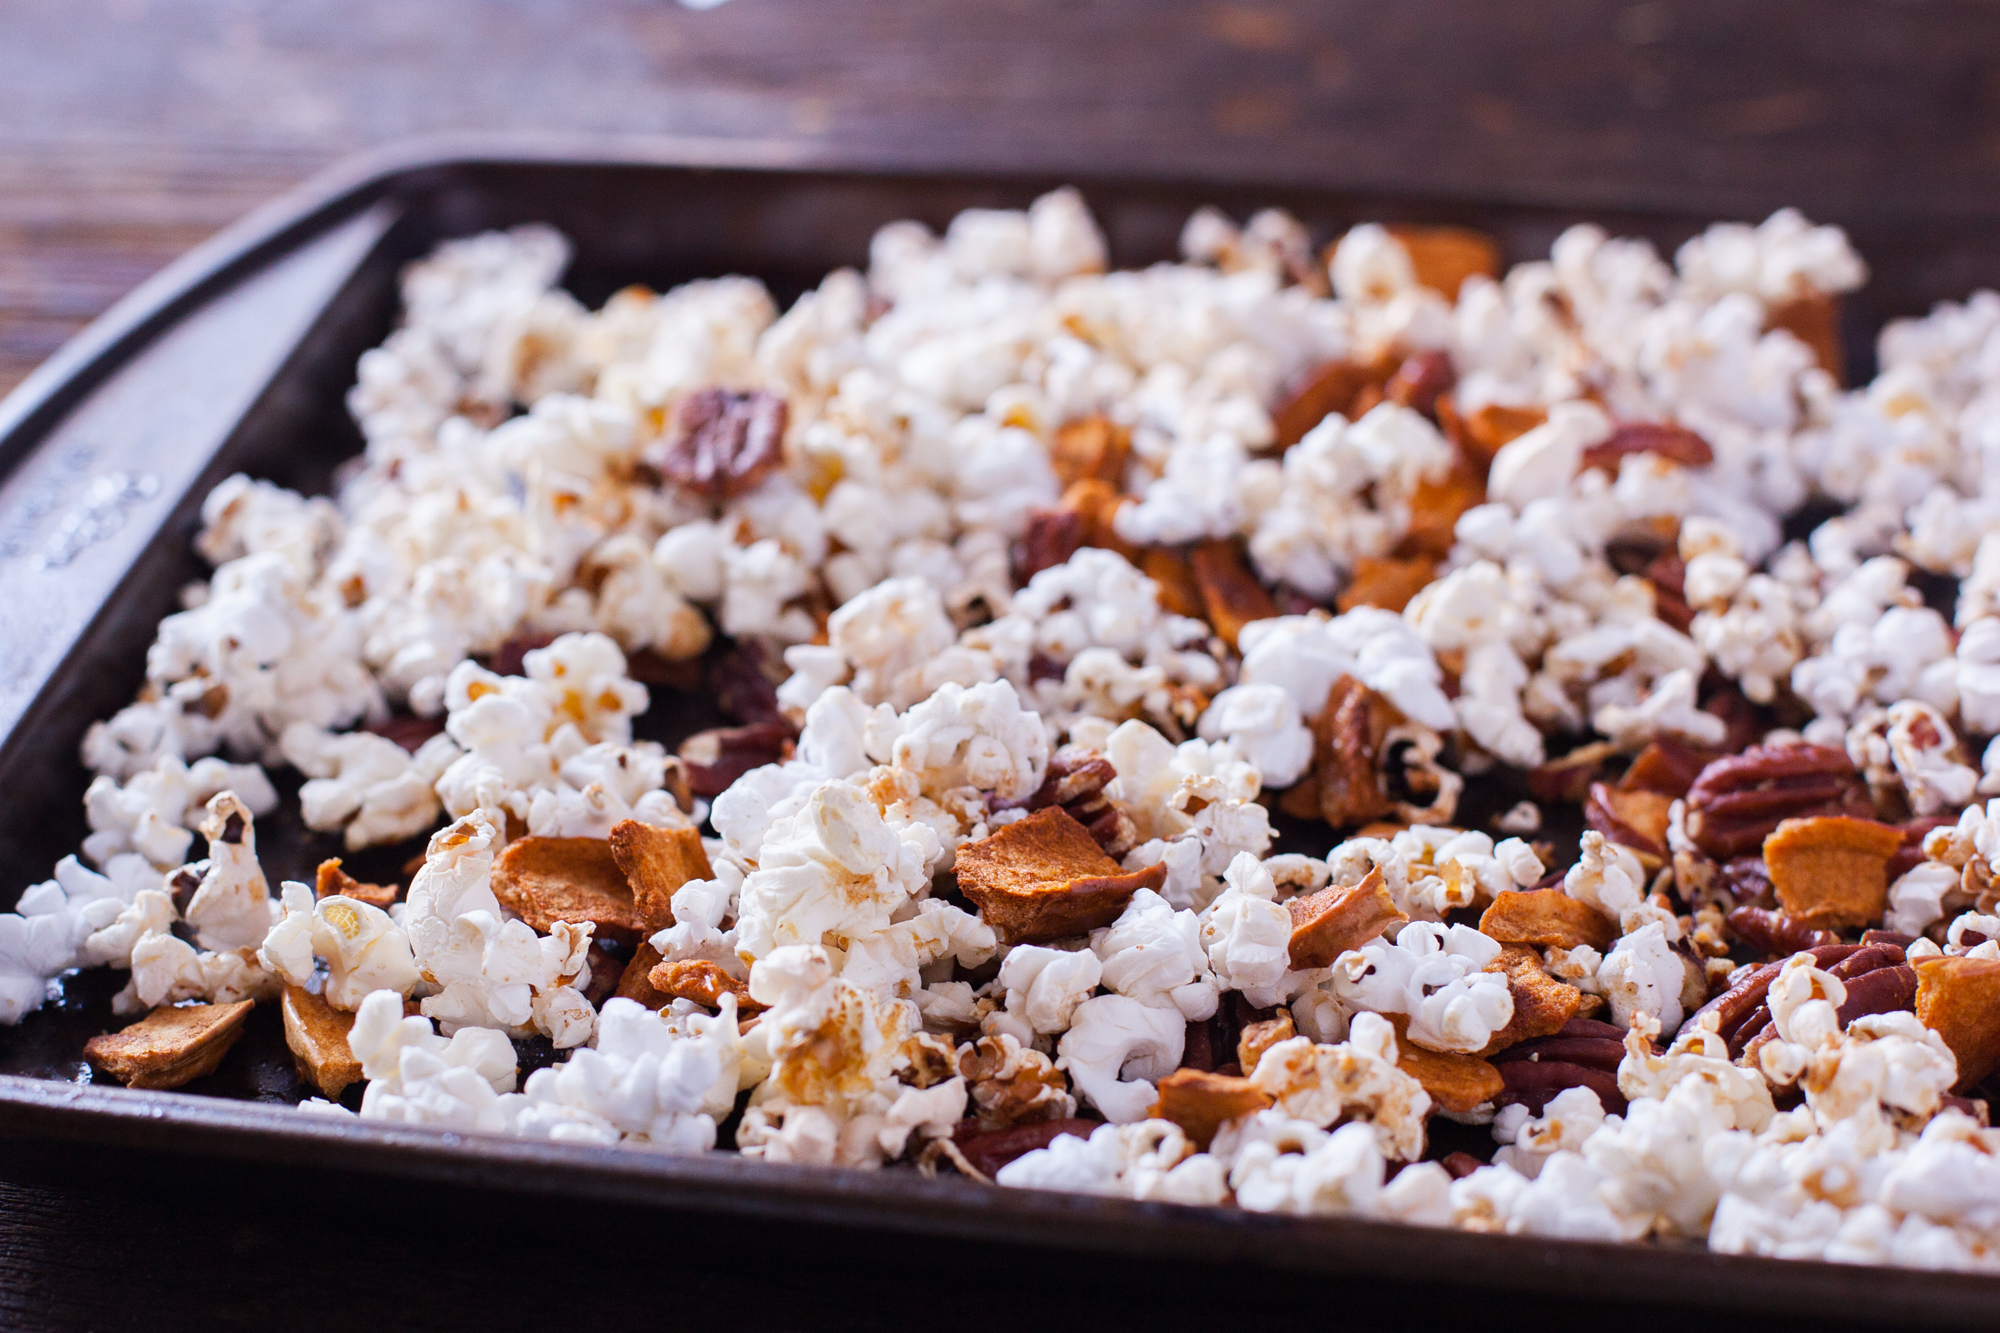 This healthy cinnamon popcorn recipe tosses dried apples, pecans, and air popped popcorn in a light cinnamon butter, for an irresistible snack mix. From EatingRichly.com